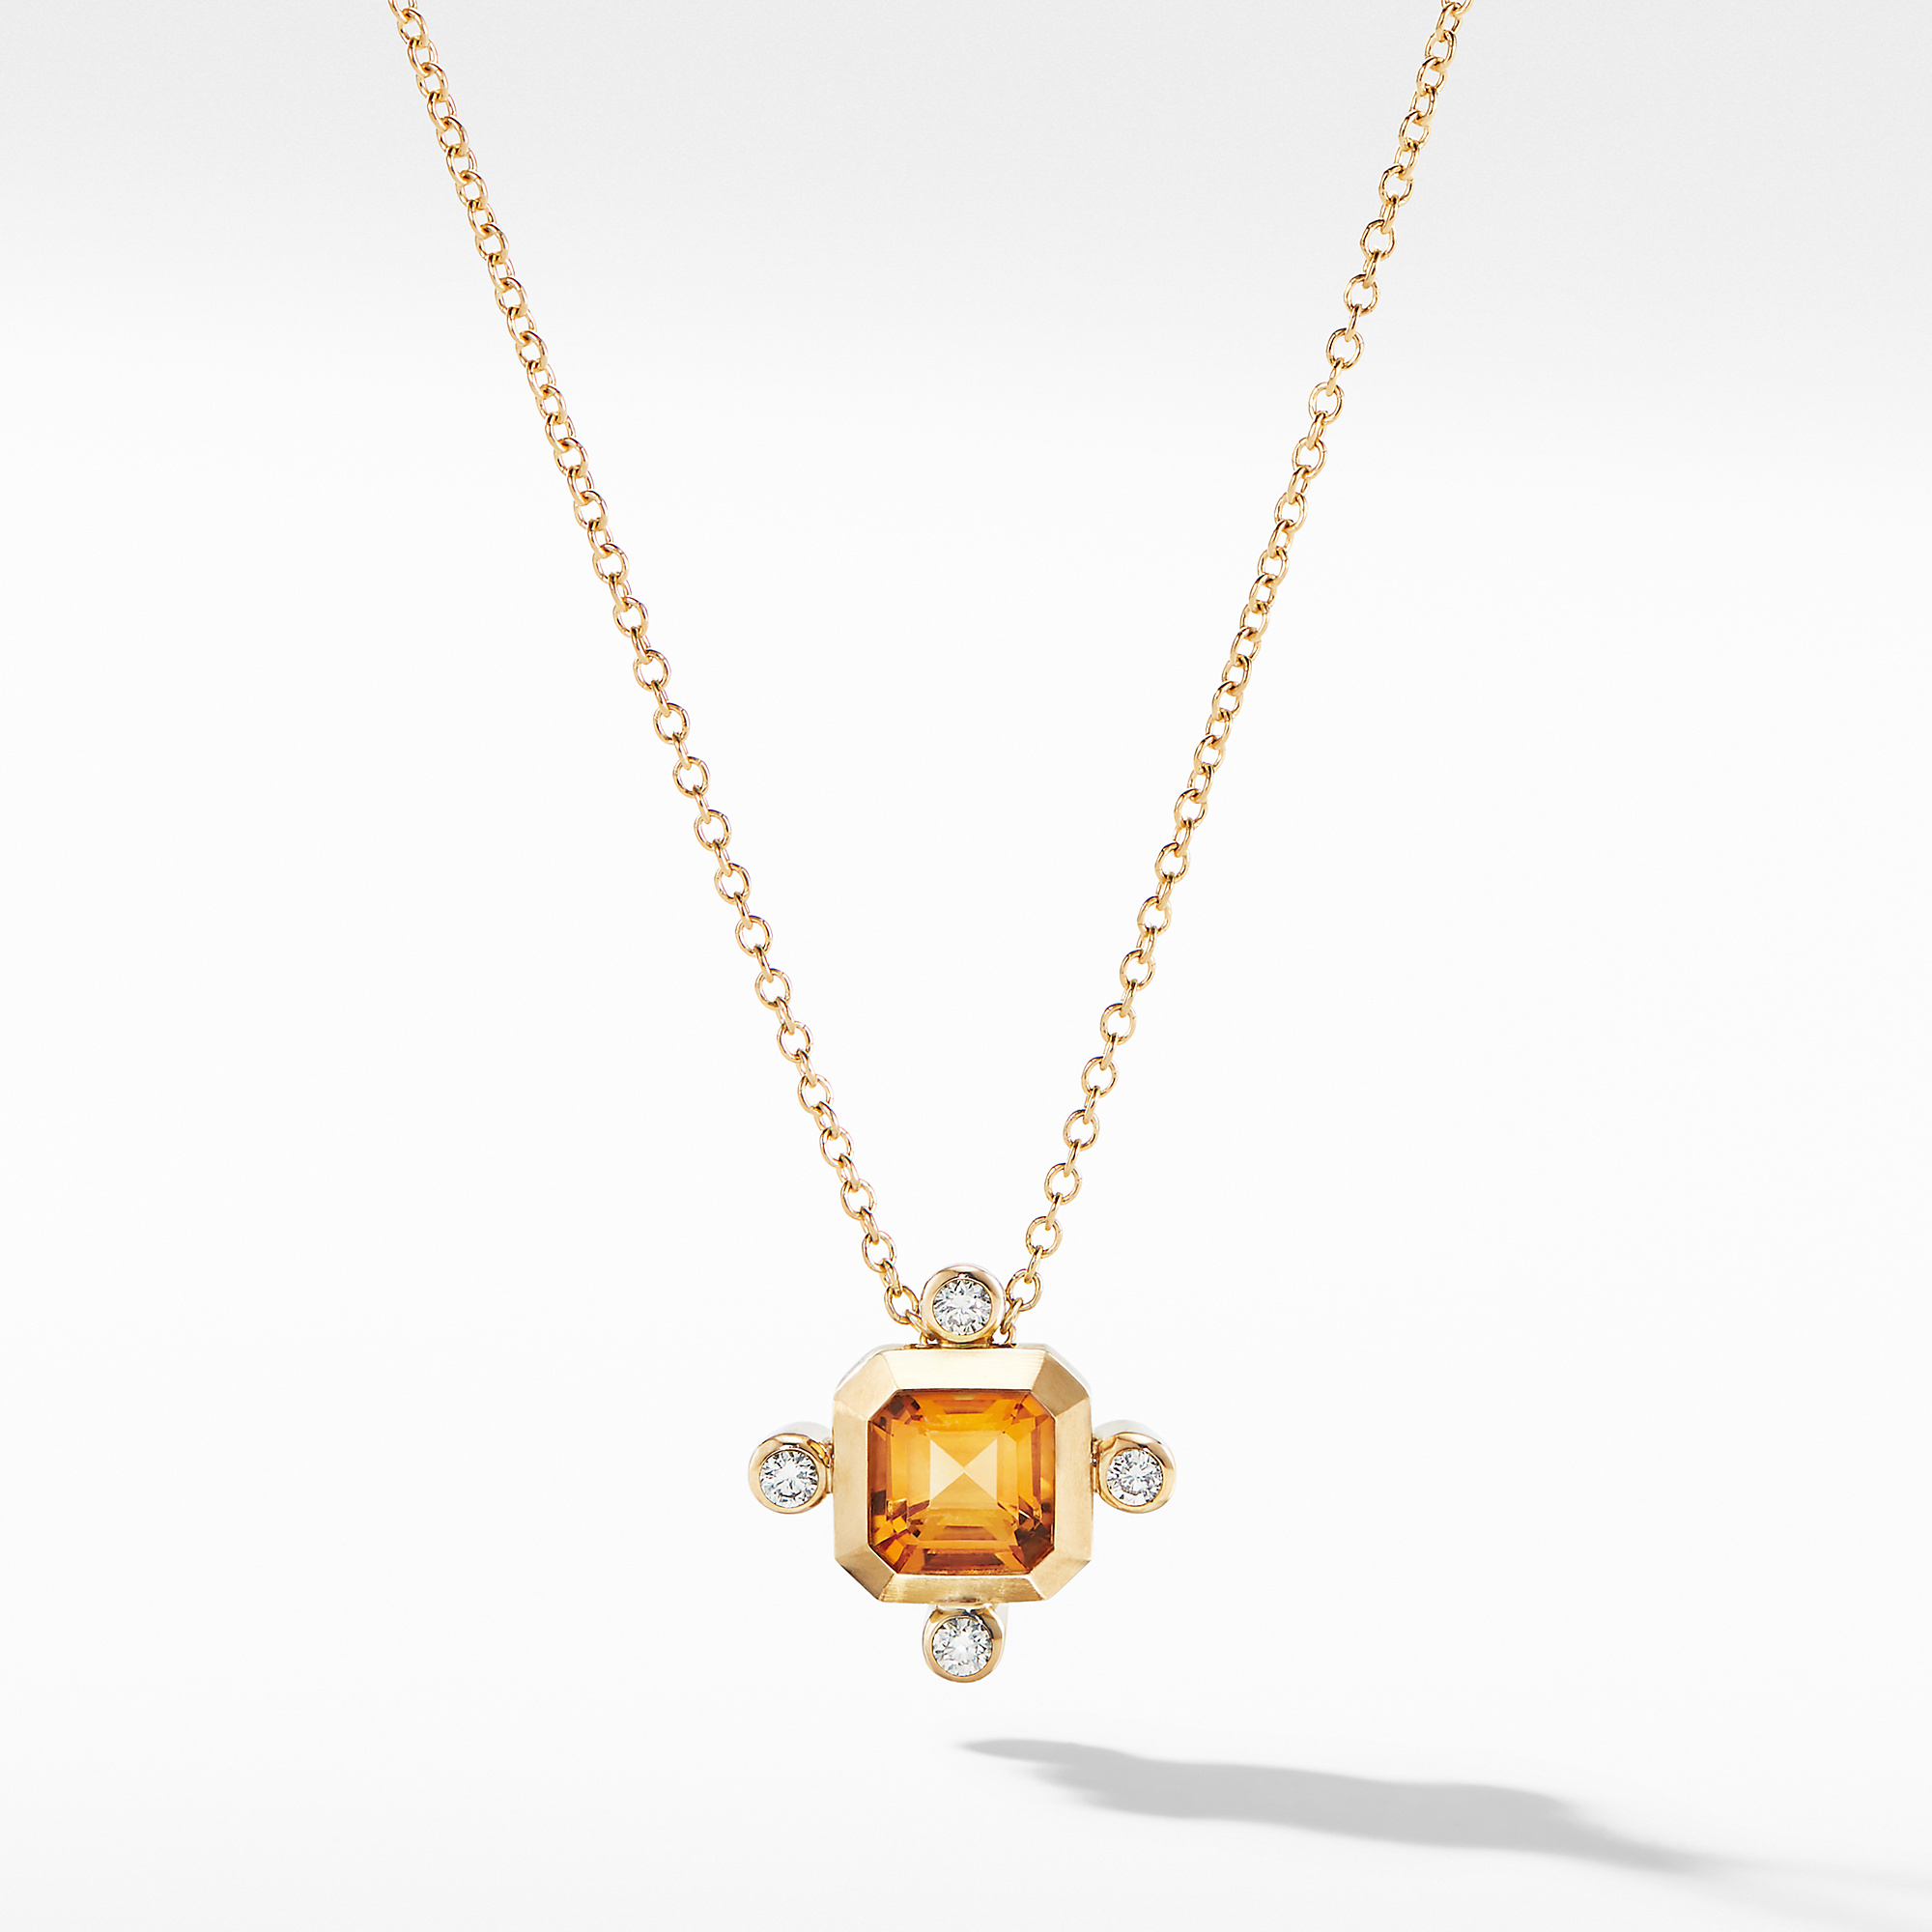 Novella Pendant Necklace in 18K Yellow Gold Madeira Citrine with Diamonds